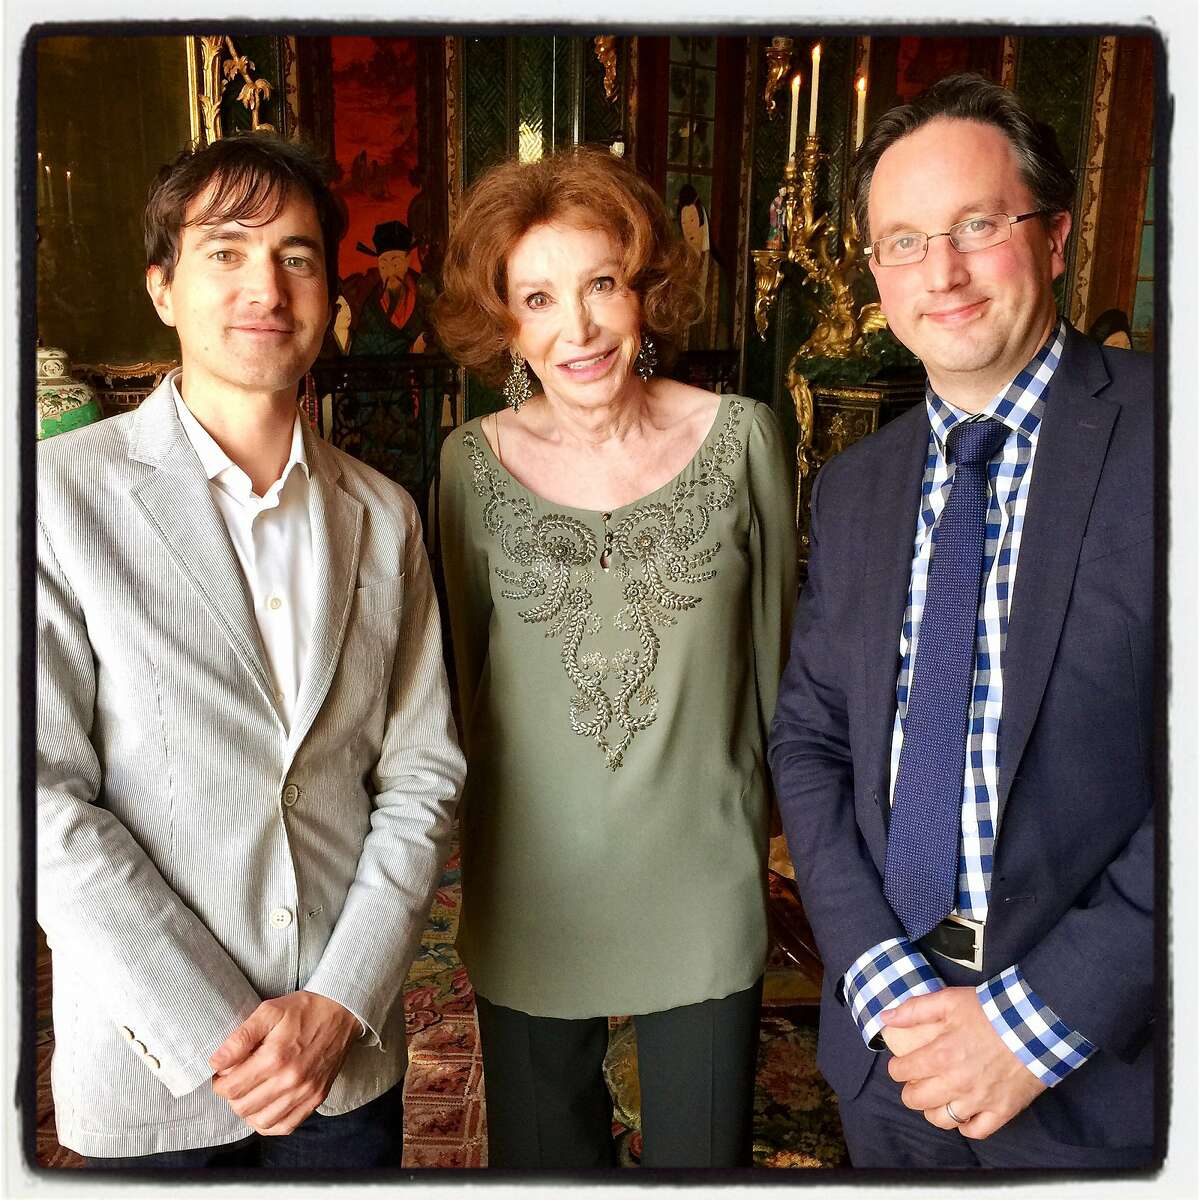 Composer Mason Bates (left) with Ann Getty and SF Opera General Director Matthew Shilvock at a listening party hosted by the Getty's. May 18, 2017.